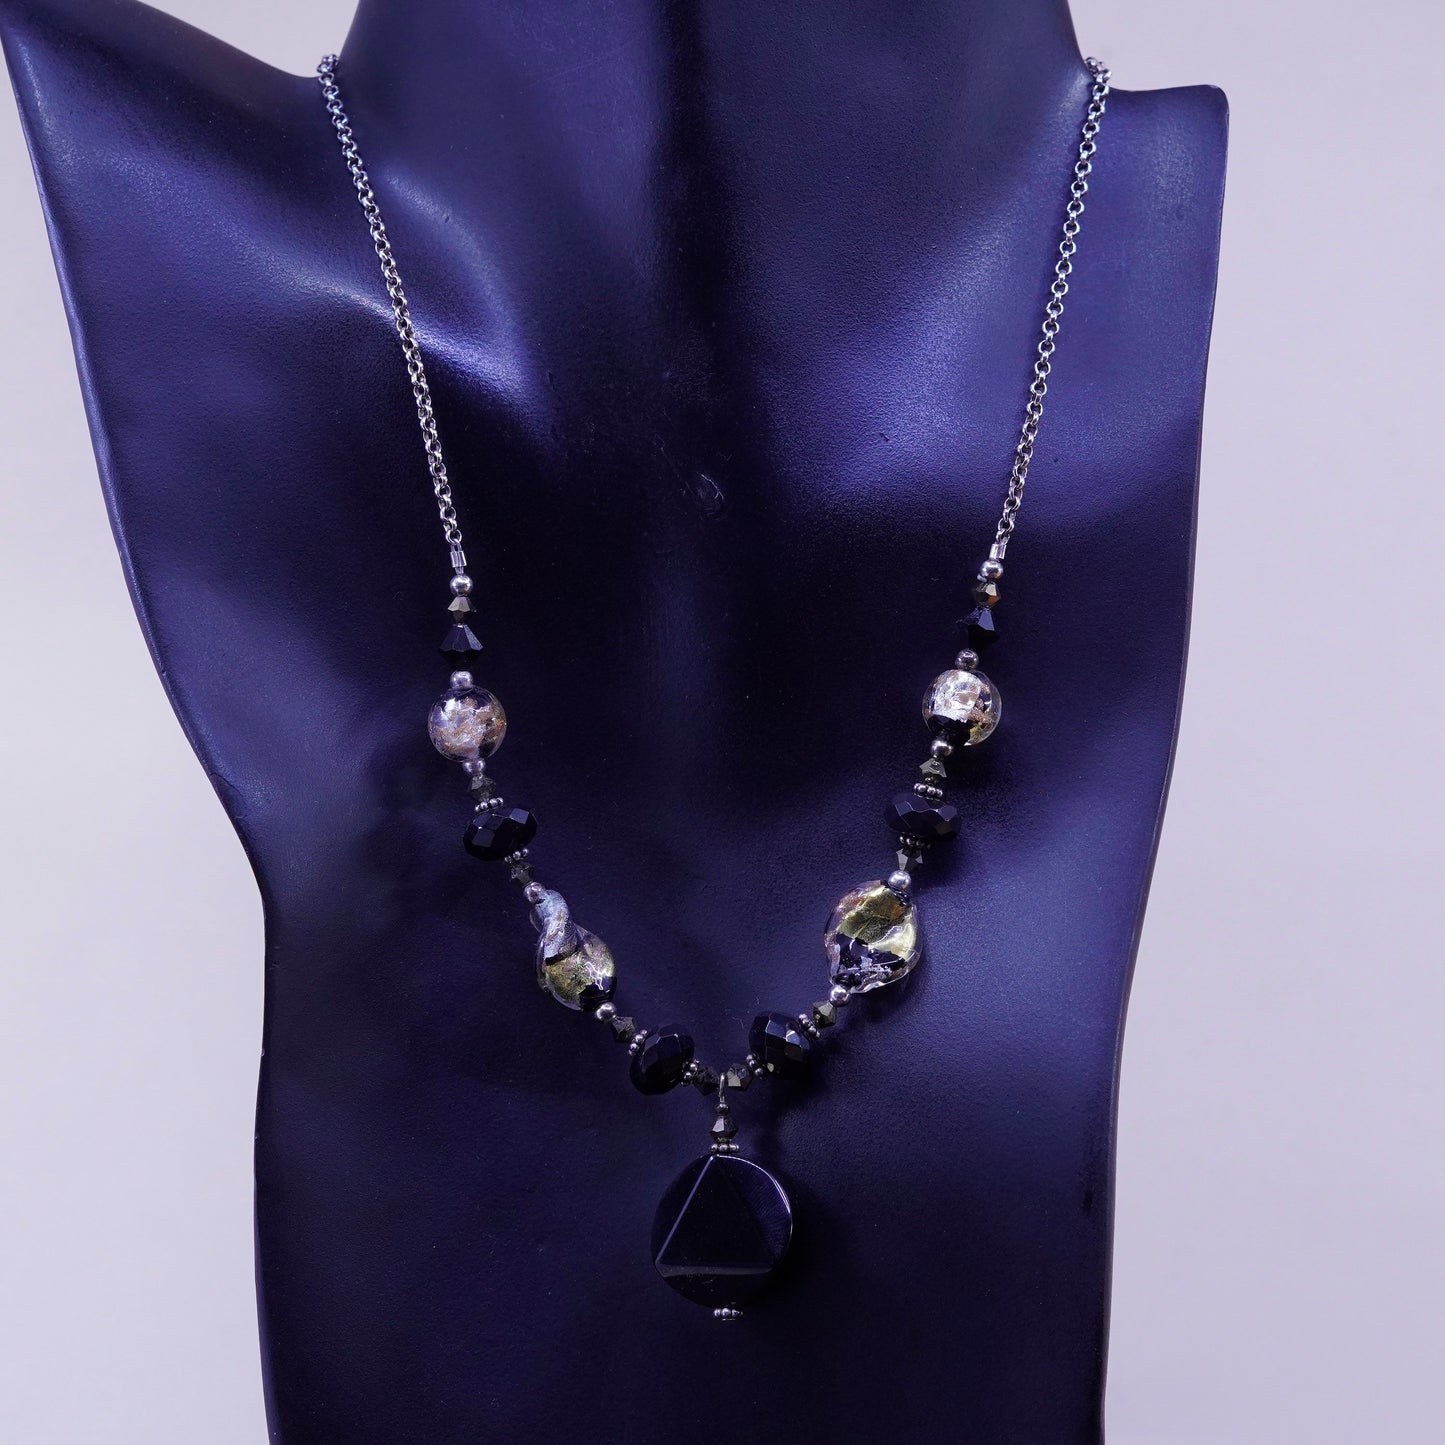 16+2”, sterling 925 silver chain necklace with obsidian beads and pendant